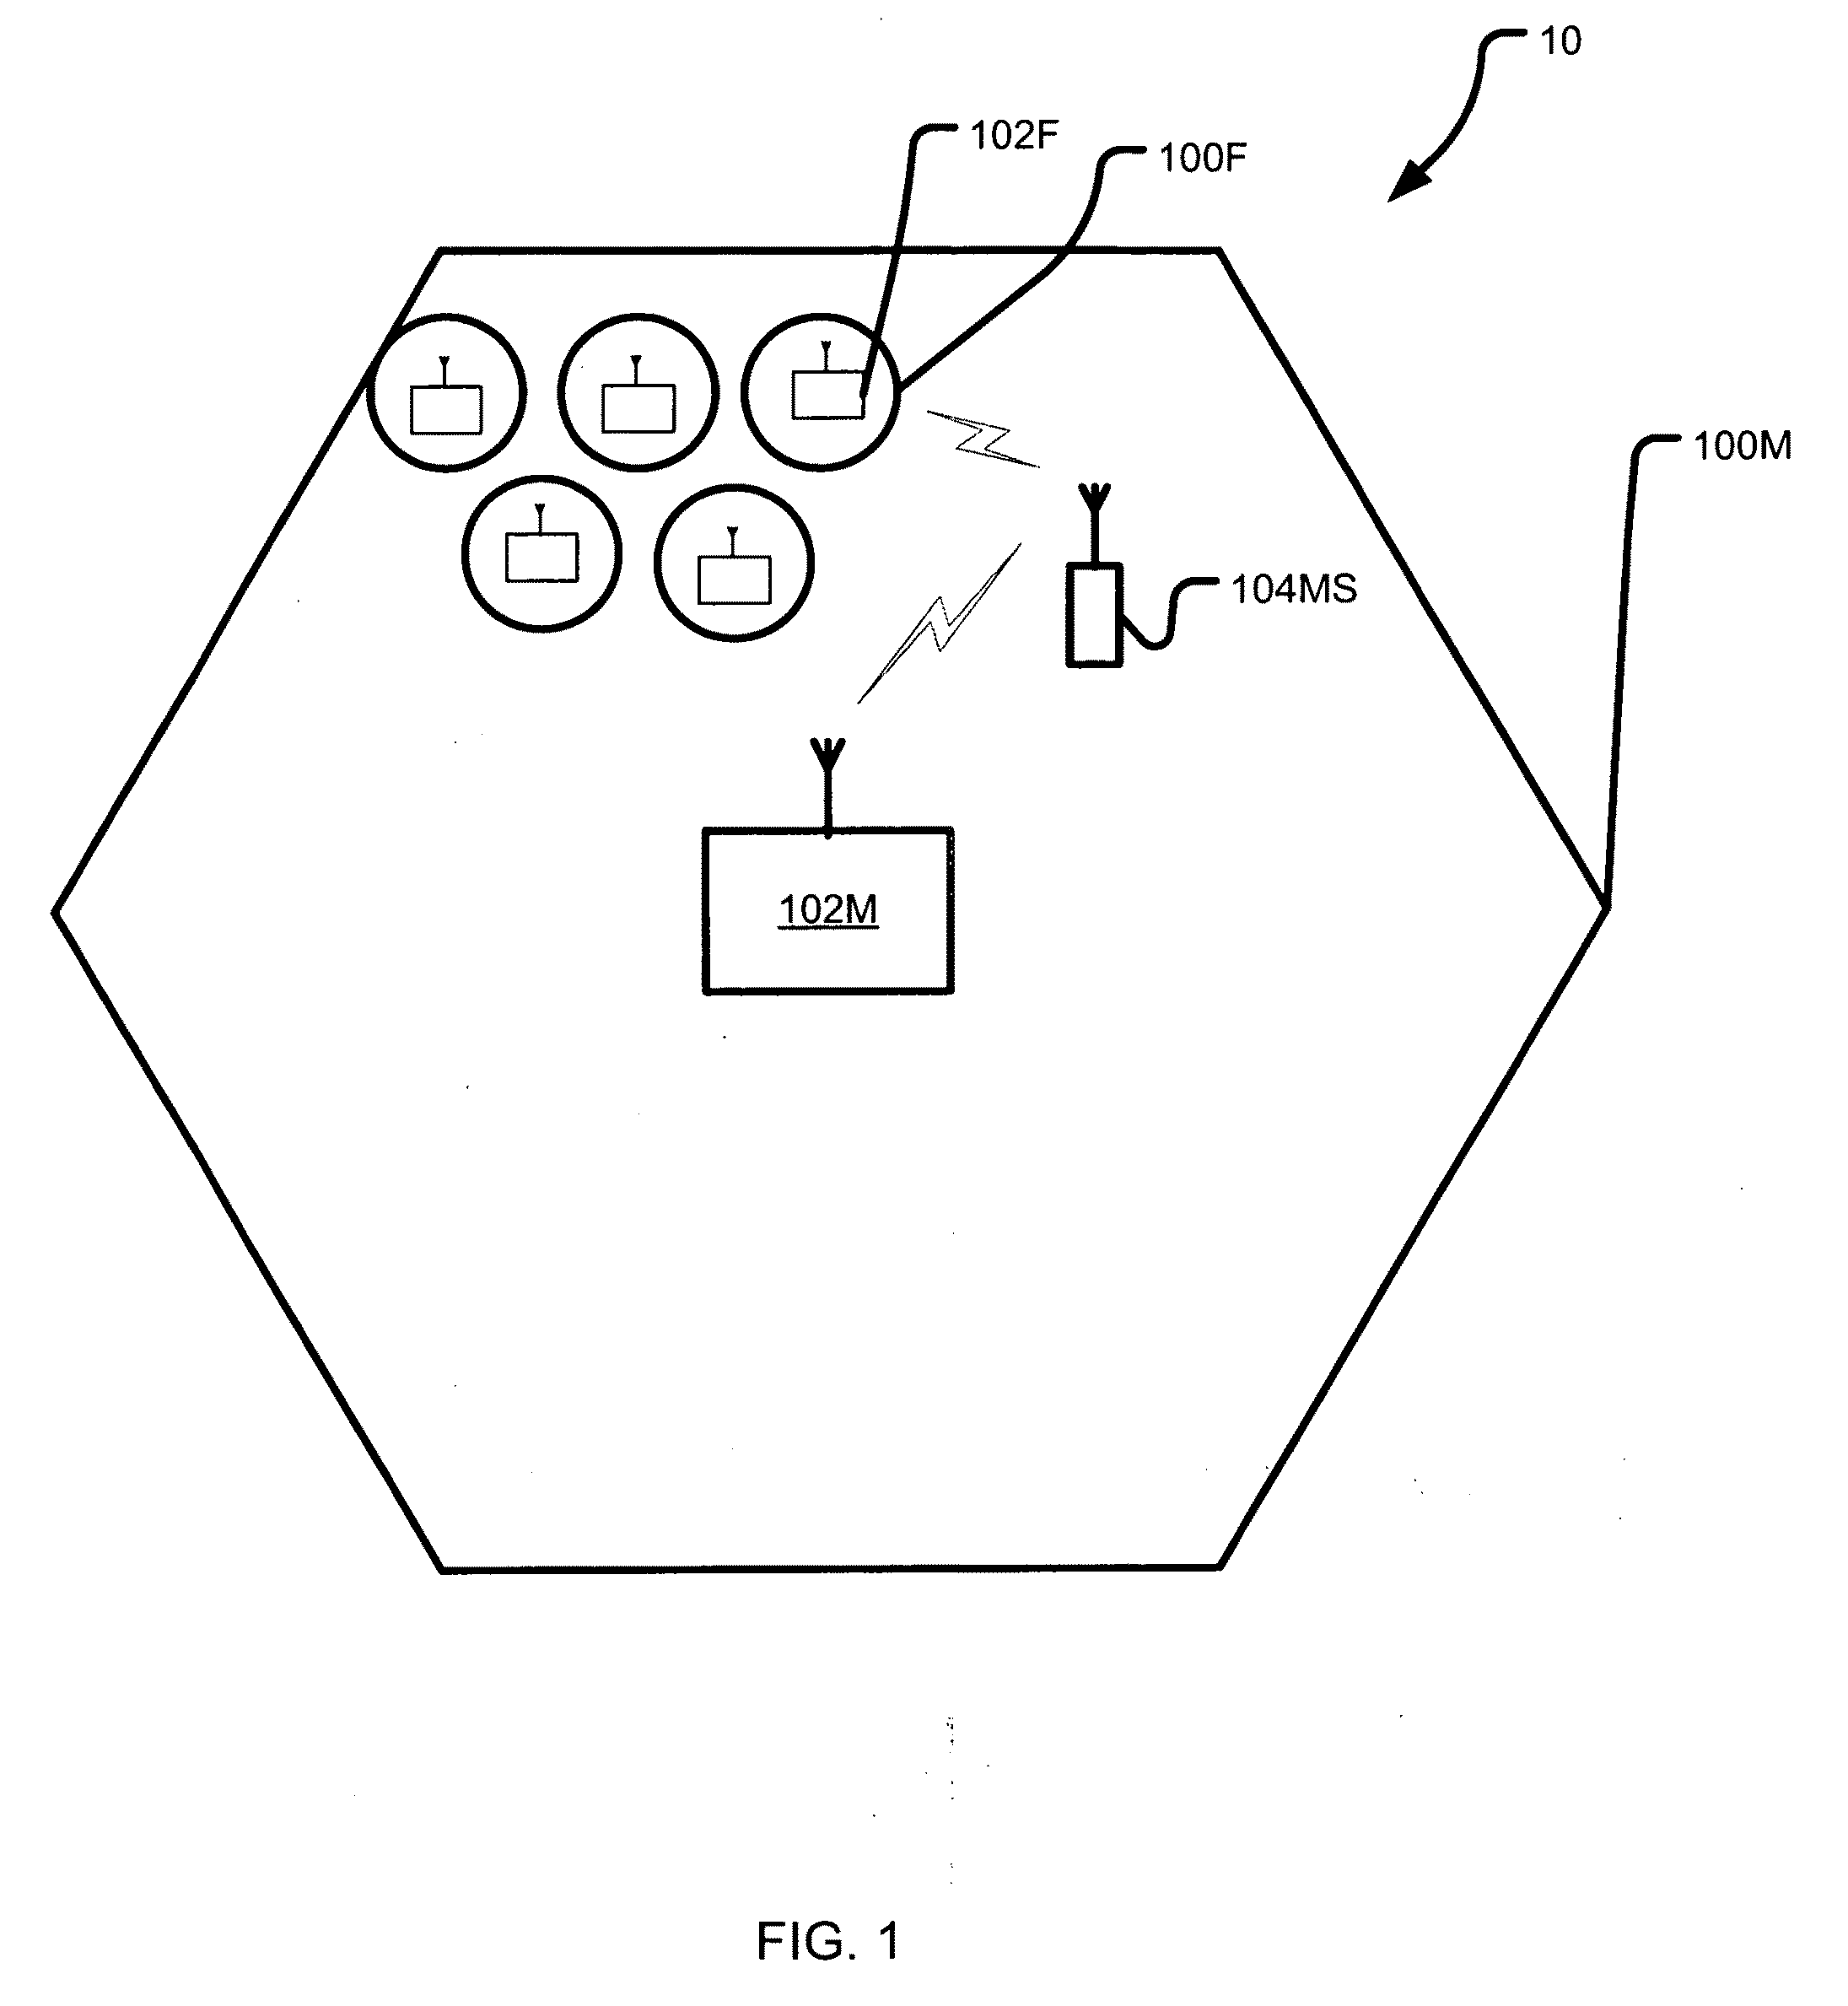 Methods for managing co-located macro and femto base station deployments and methods for initiating mobile station handoff